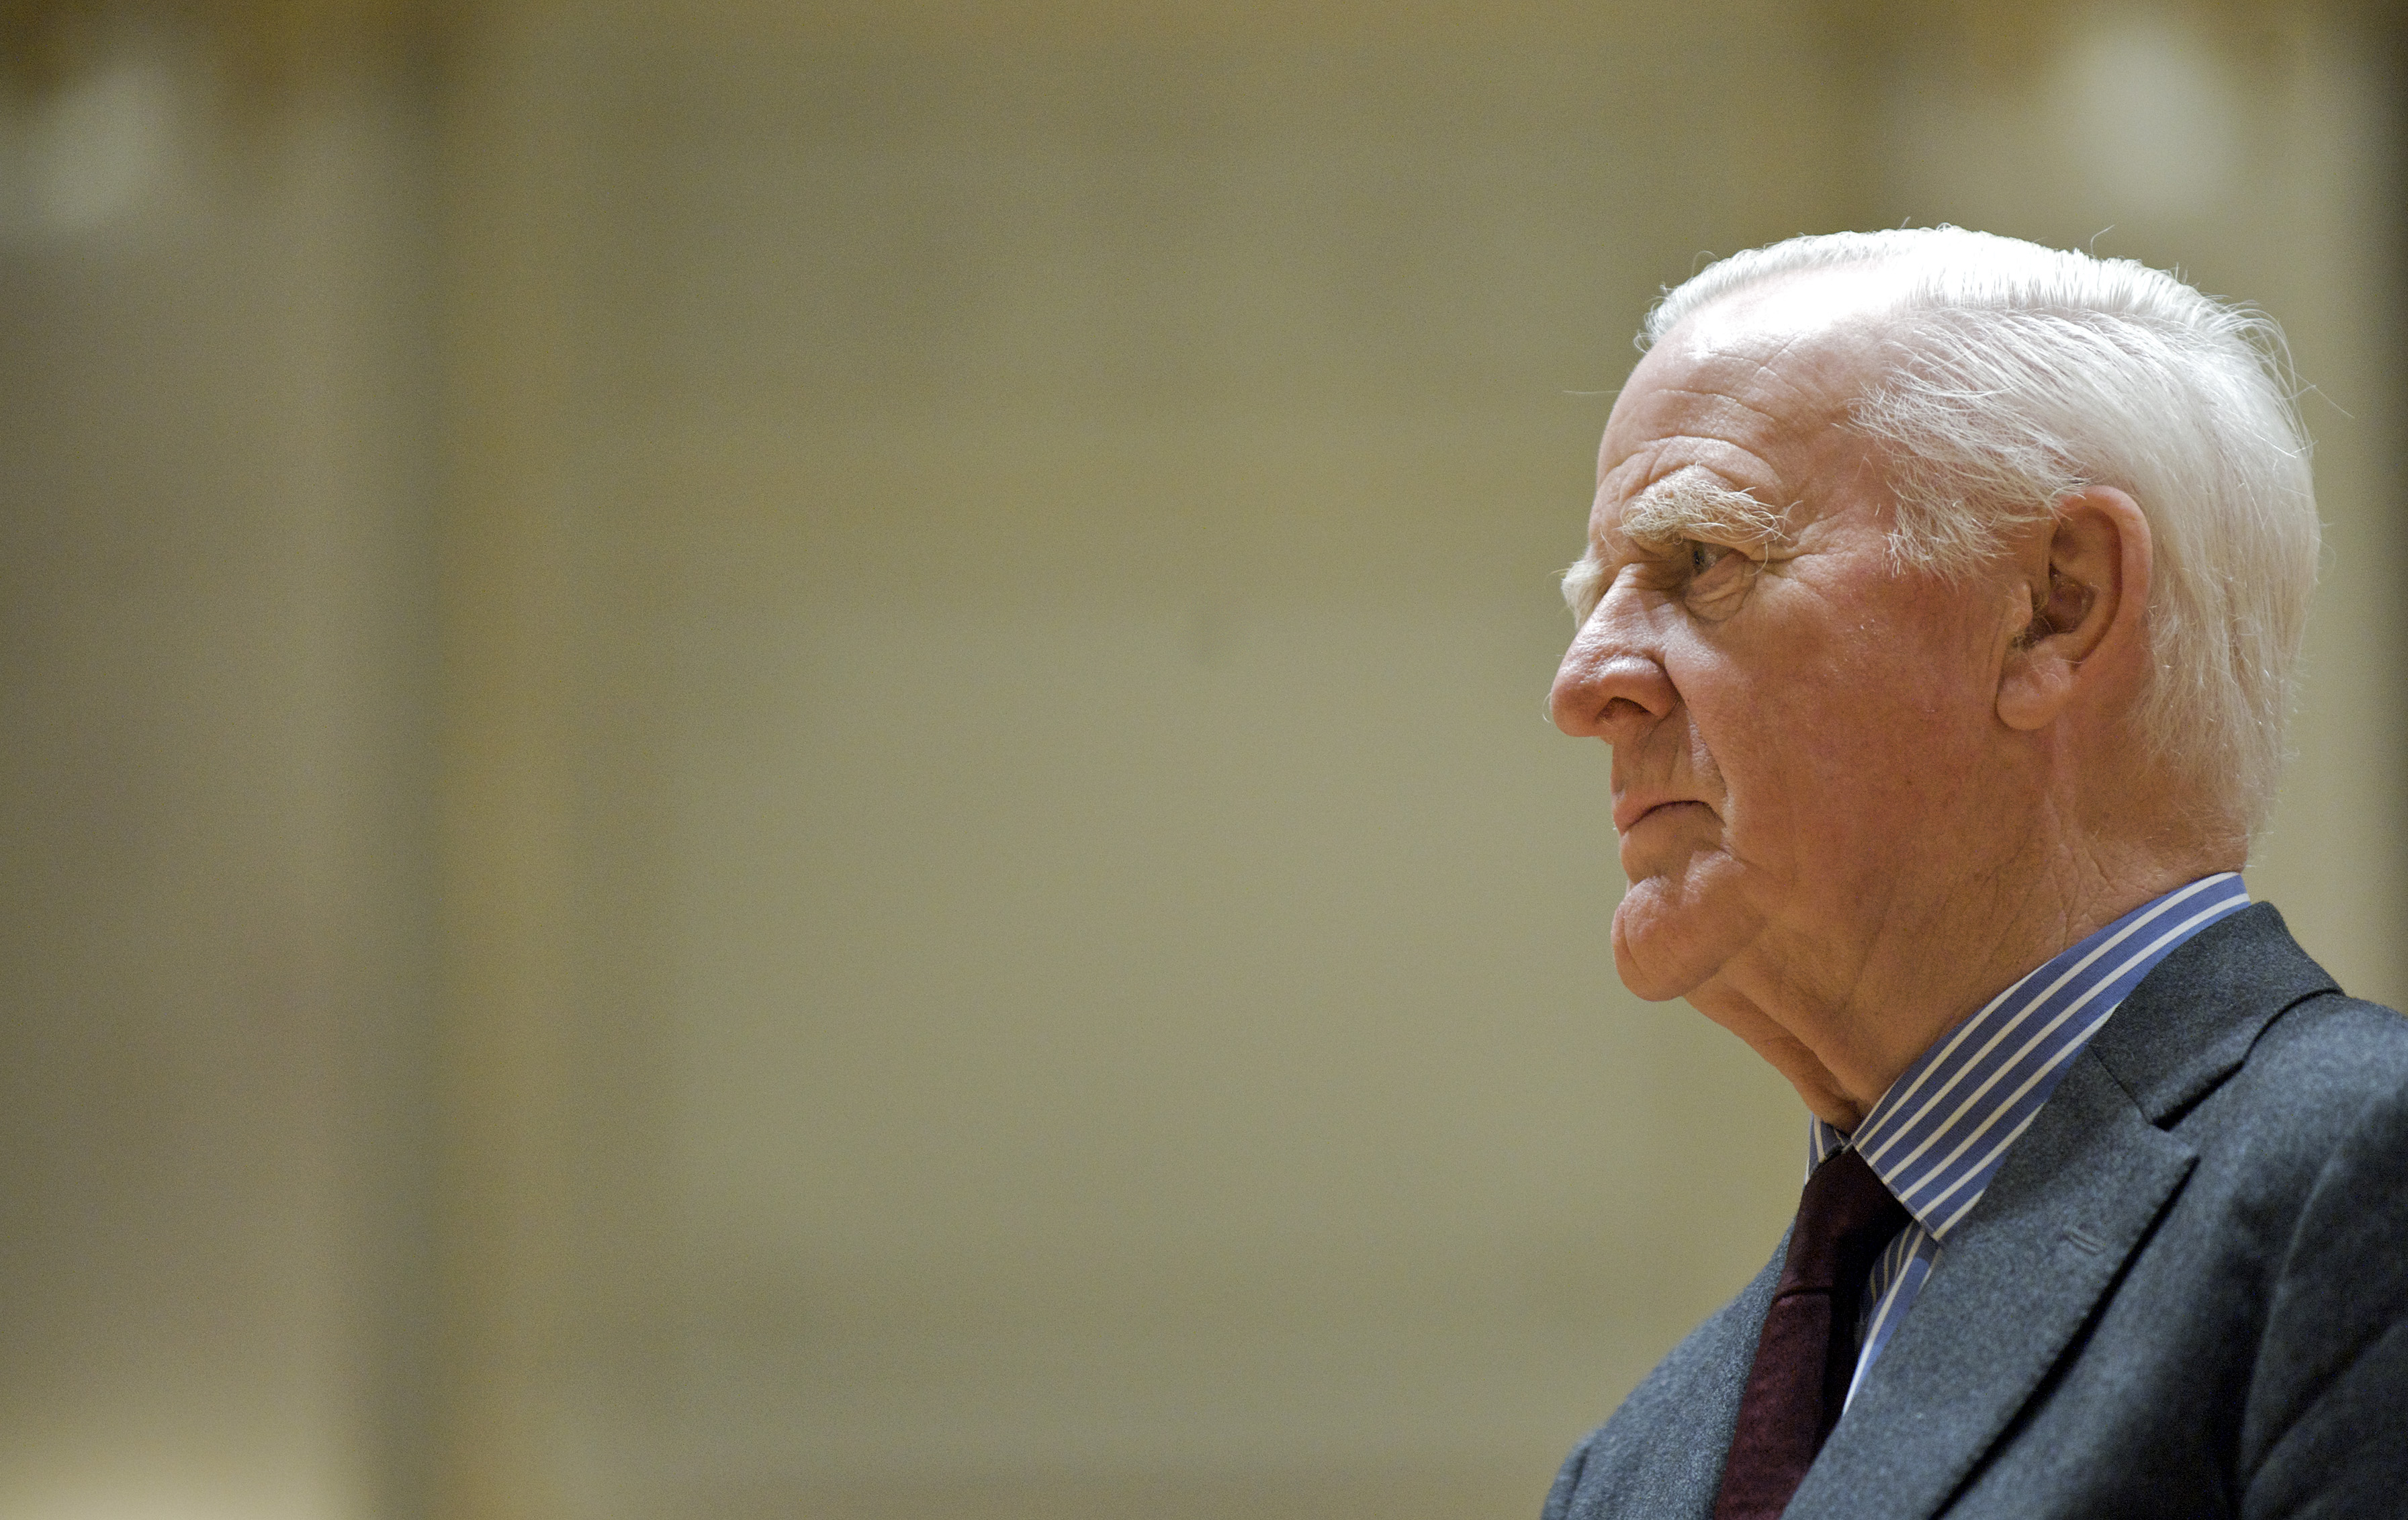 John le Carré received an honorary doctorate from the University of Bern in 2009